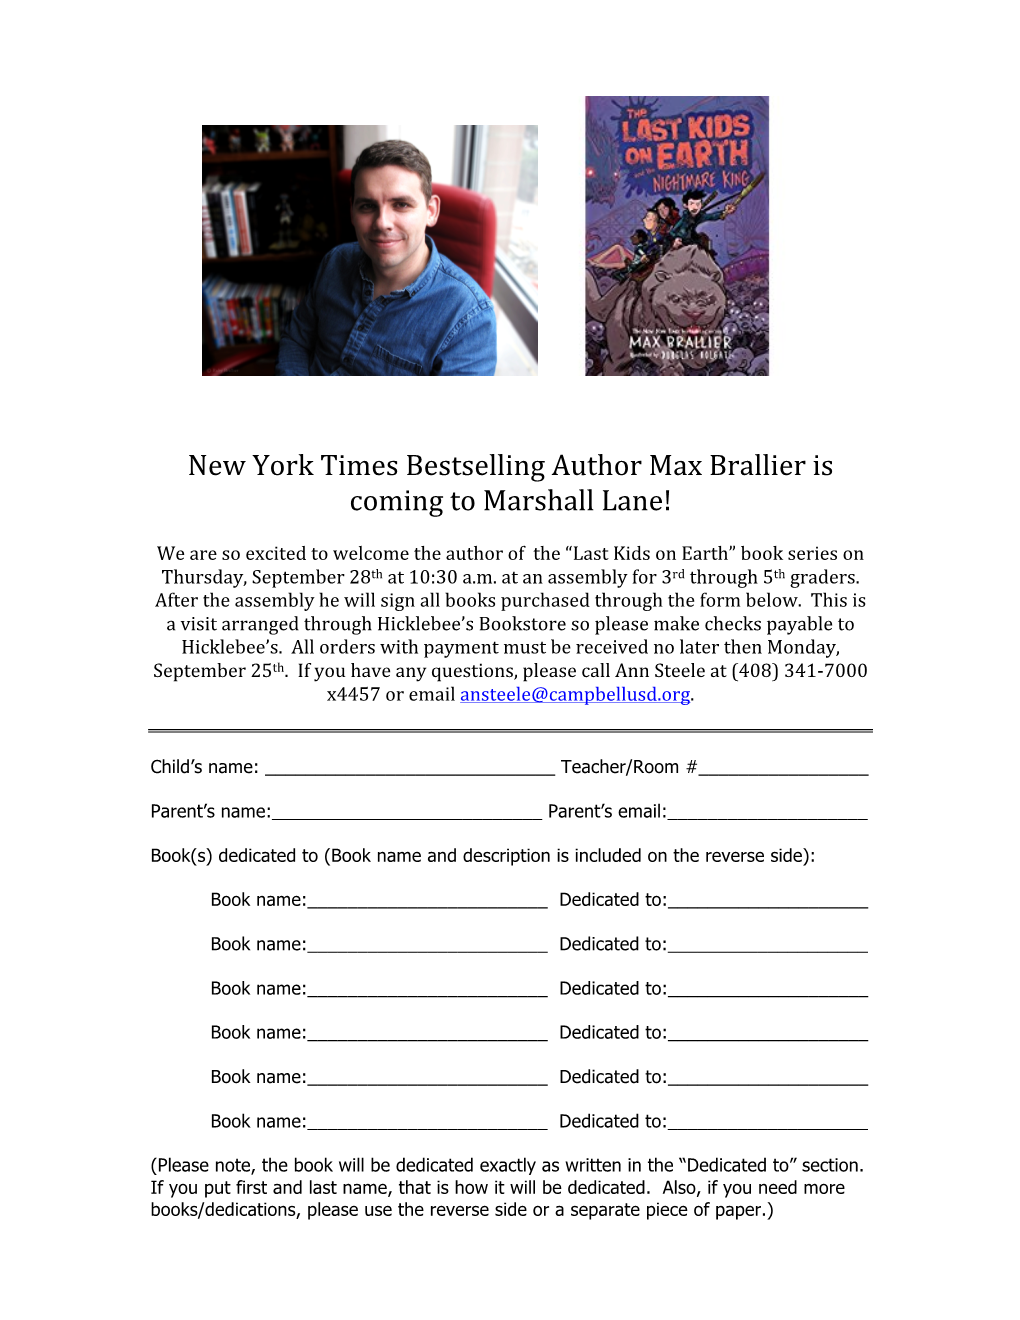 New York Times Bestselling Author Max Brallier Is Coming to Marshall Lane!